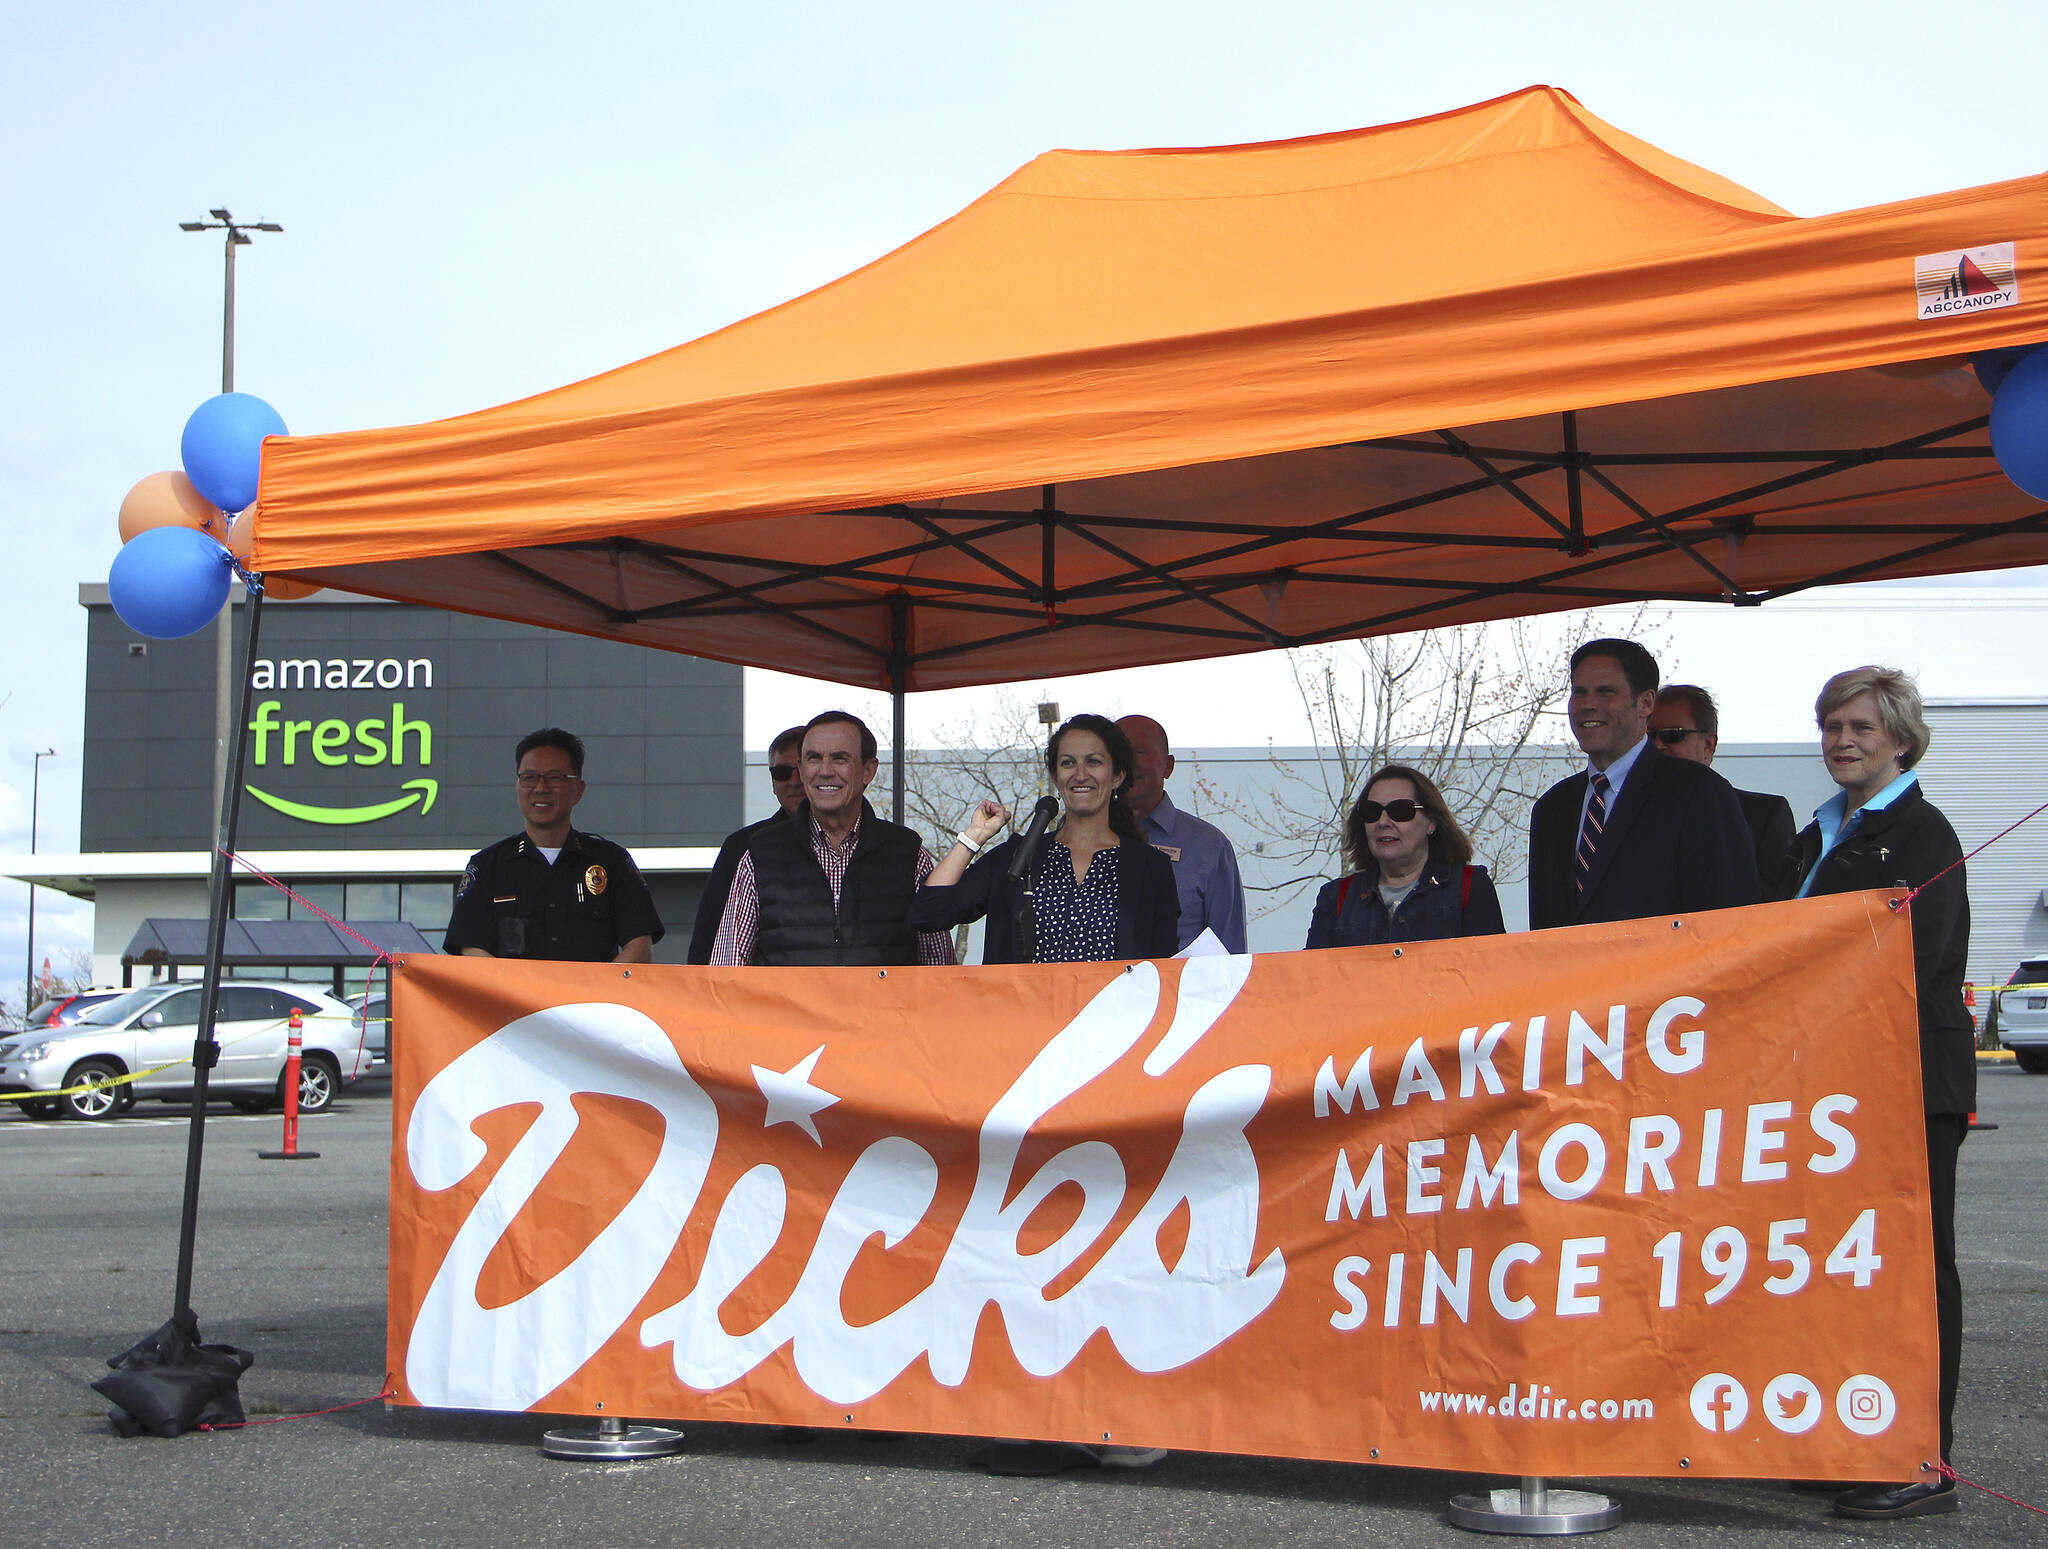 Dick’s Drive-In President Jasmine Donovan, center, speaks to the crowd during the location reveal celebration on April 28. She is joined by several local officials and business leaders. Olivia Sullivan/the Mirror